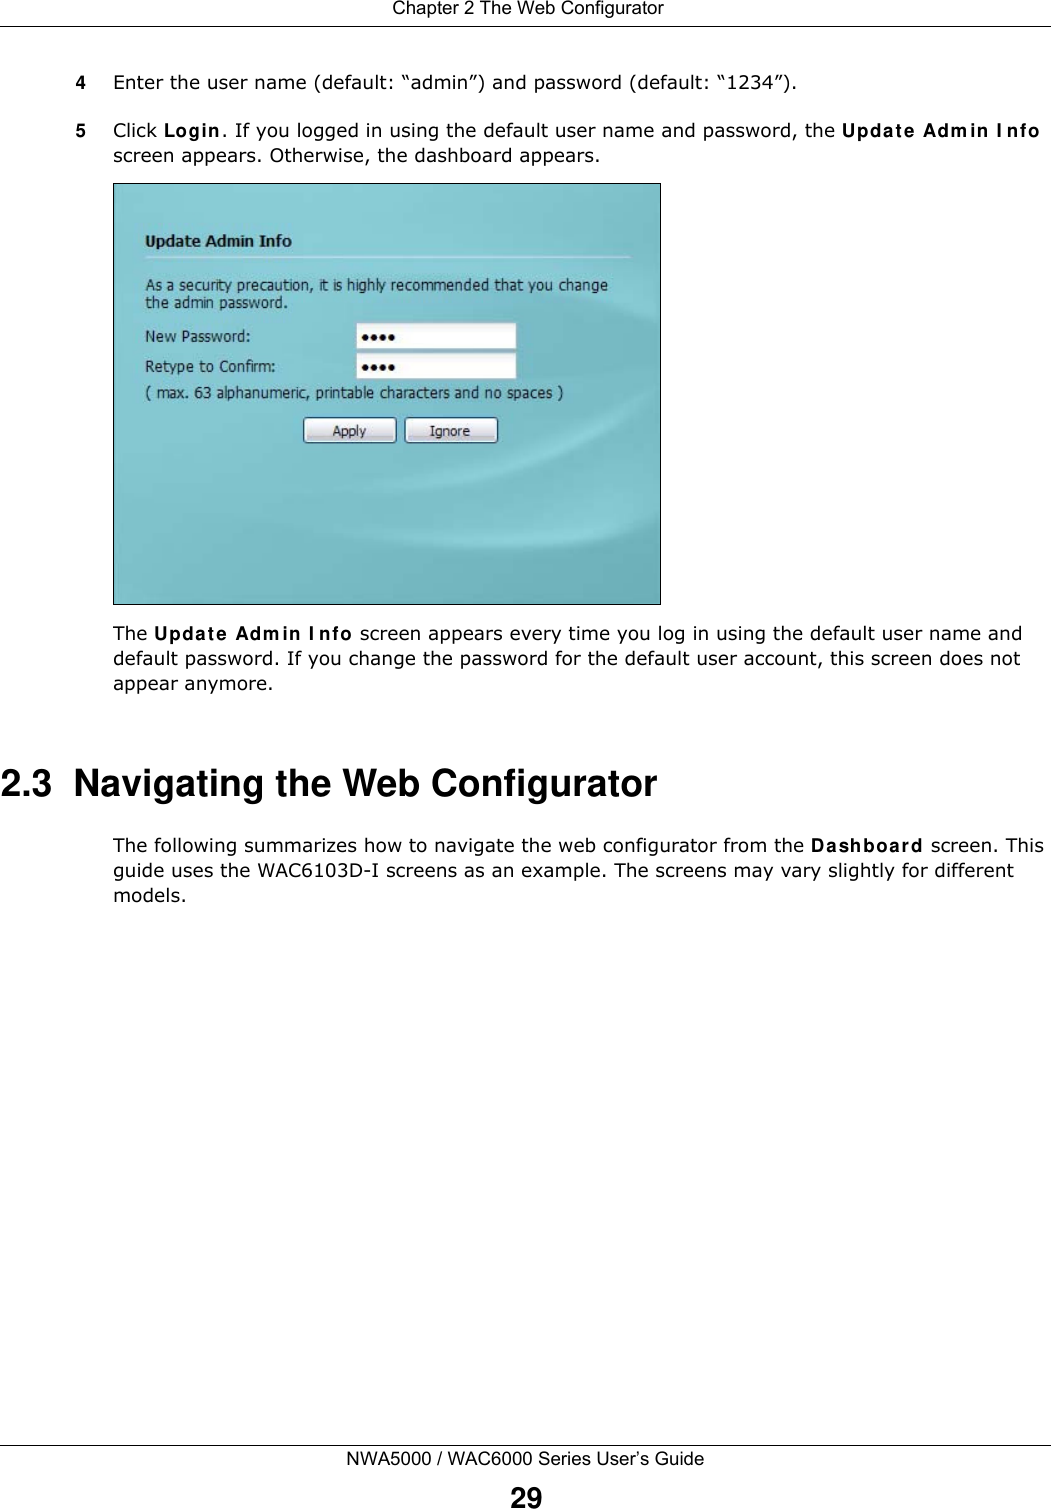  Chapter 2 The Web ConfiguratorNWA5000 / WAC6000 Series User’s Guide294Enter the user name (default: “admin”) and password (default: “1234”).5Click Login. If you logged in using the default user name and password, the Updat e  Adm in I nfo screen appears. Otherwise, the dashboard appears. The Updat e Adm in I nfo screen appears every time you log in using the default user name and default password. If you change the password for the default user account, this screen does not appear anymore.2.3  Navigating the Web ConfiguratorThe following summarizes how to navigate the web configurator from the Da shboard screen. This guide uses the WAC6103D-I screens as an example. The screens may vary slightly for different models.